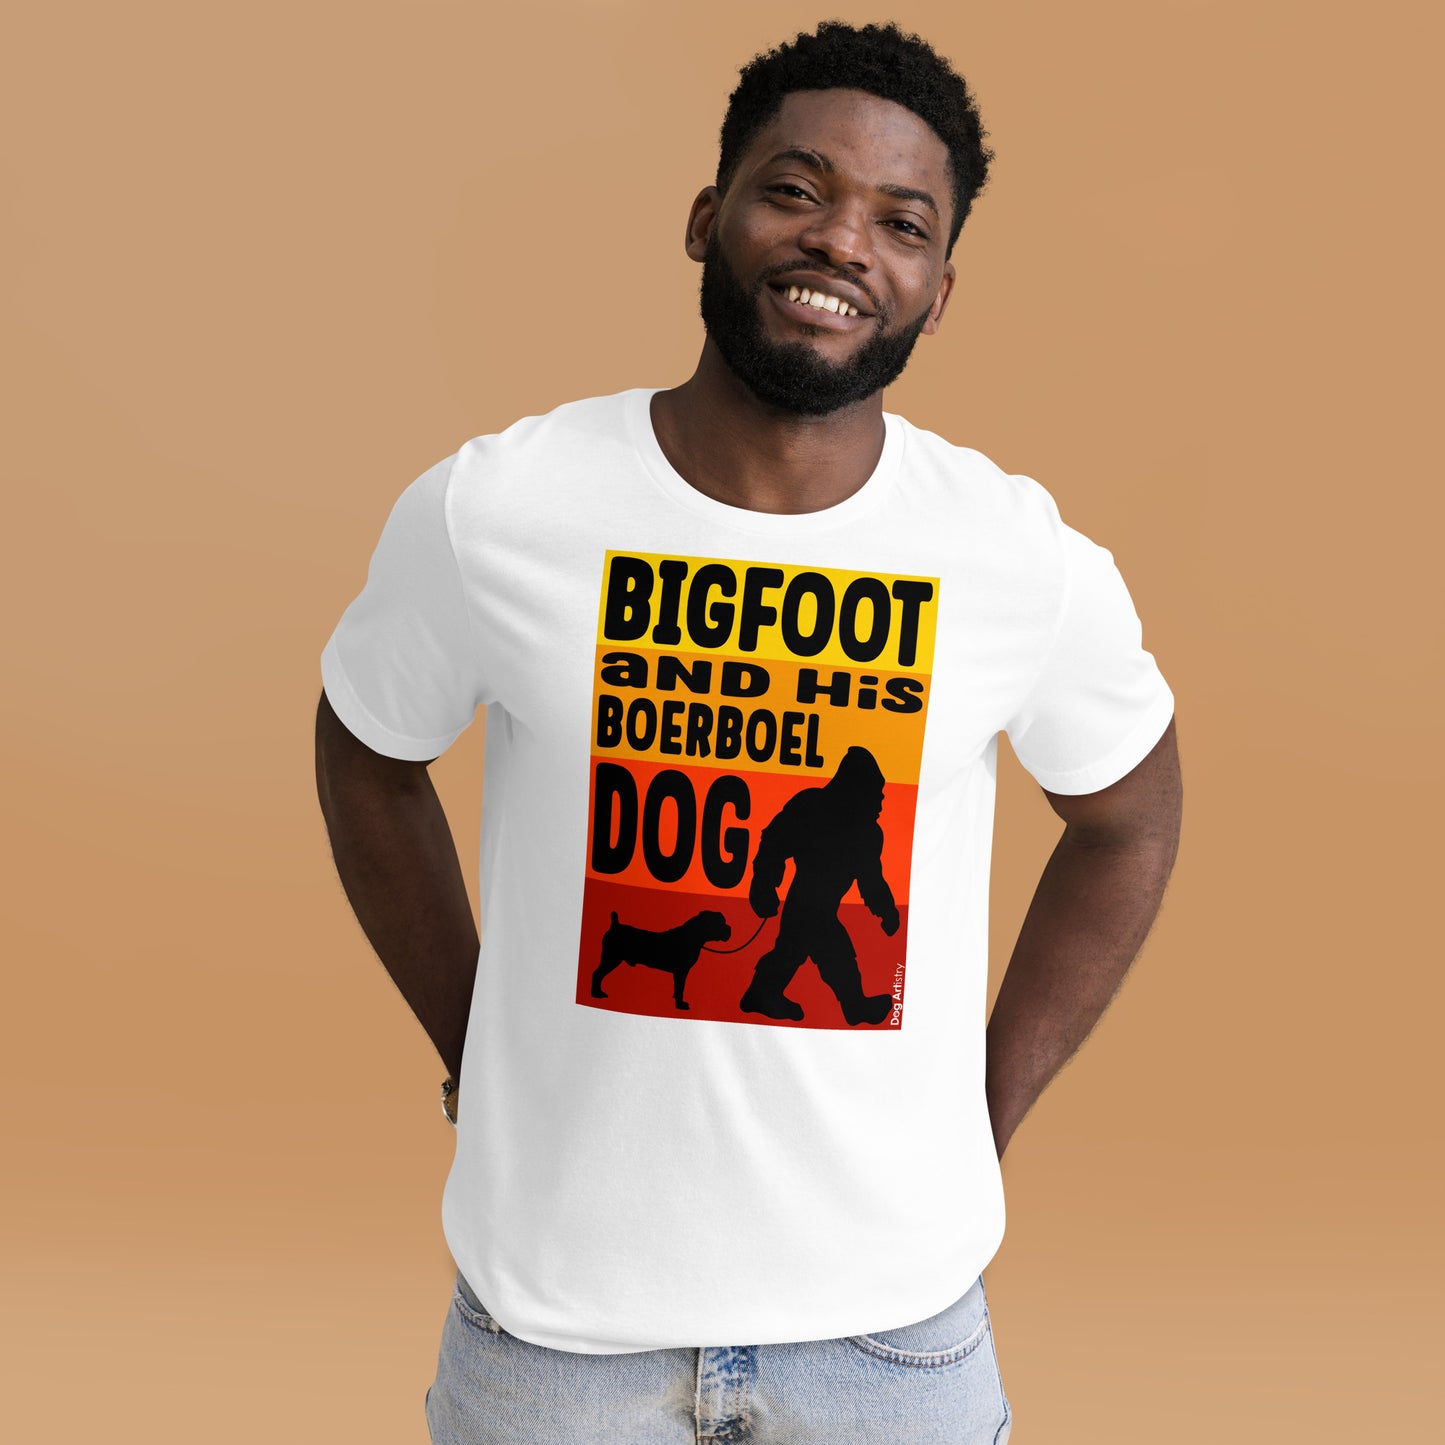 Big foot and his Boerboel dog unisex white t-shirt by Dog Artistry.